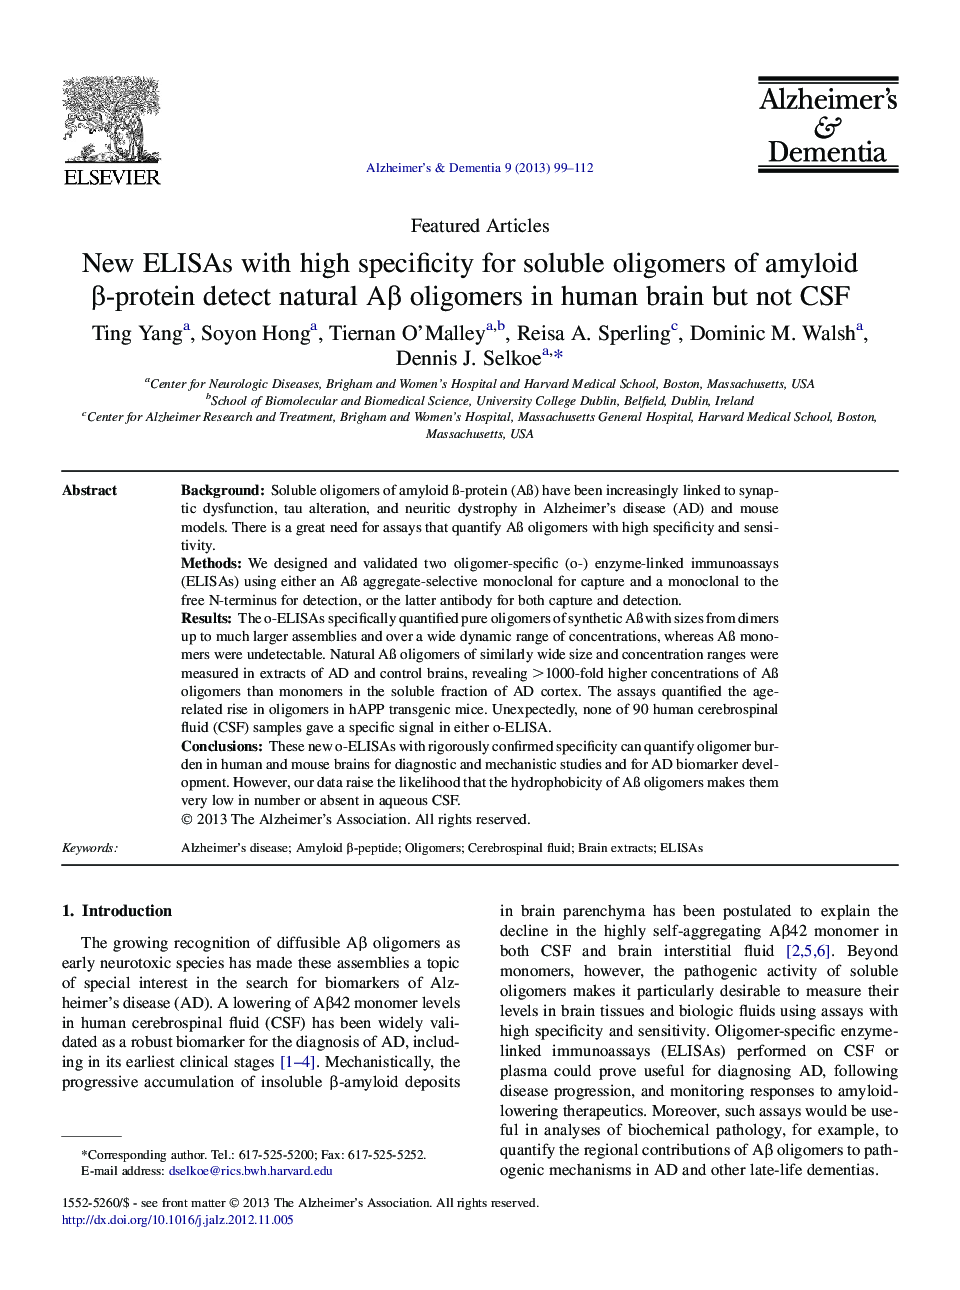 Featured ArticleNew ELISAs with high specificity for soluble oligomers of amyloid Î²-protein detect natural AÎ² oligomers in human brain but not CSF